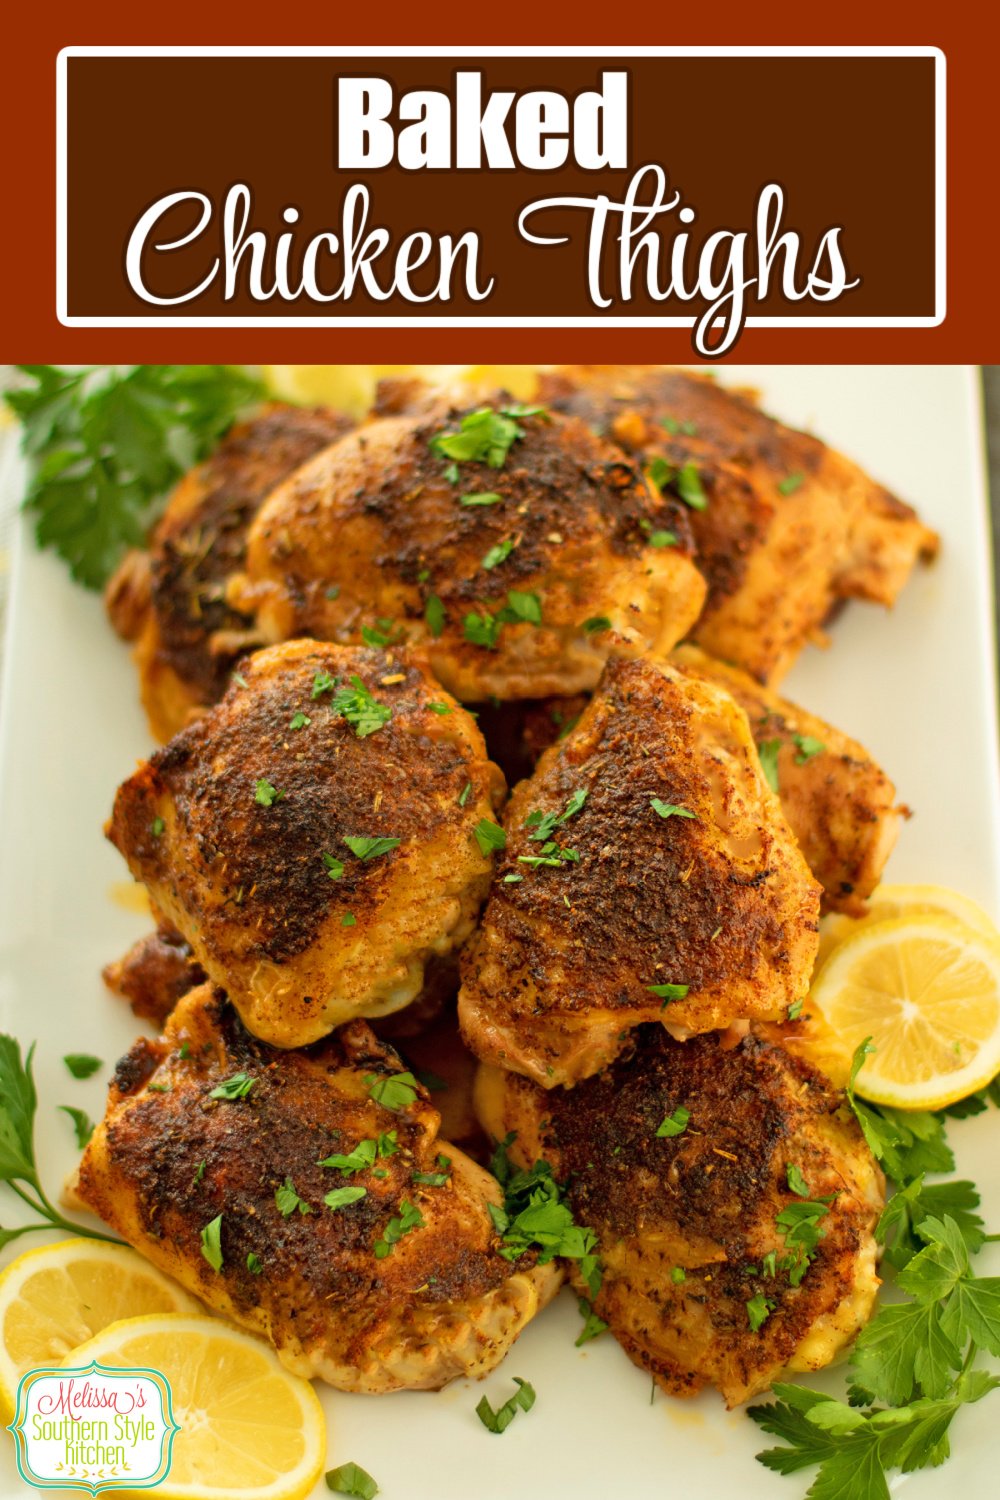 These easy Baked Chicken Thighs will have supper on the table in no time flat! #bakedchicken #chickenthighs #easychickenthighs #easychickenrecipes #dryrub #chickenrecipes via @melissasssk